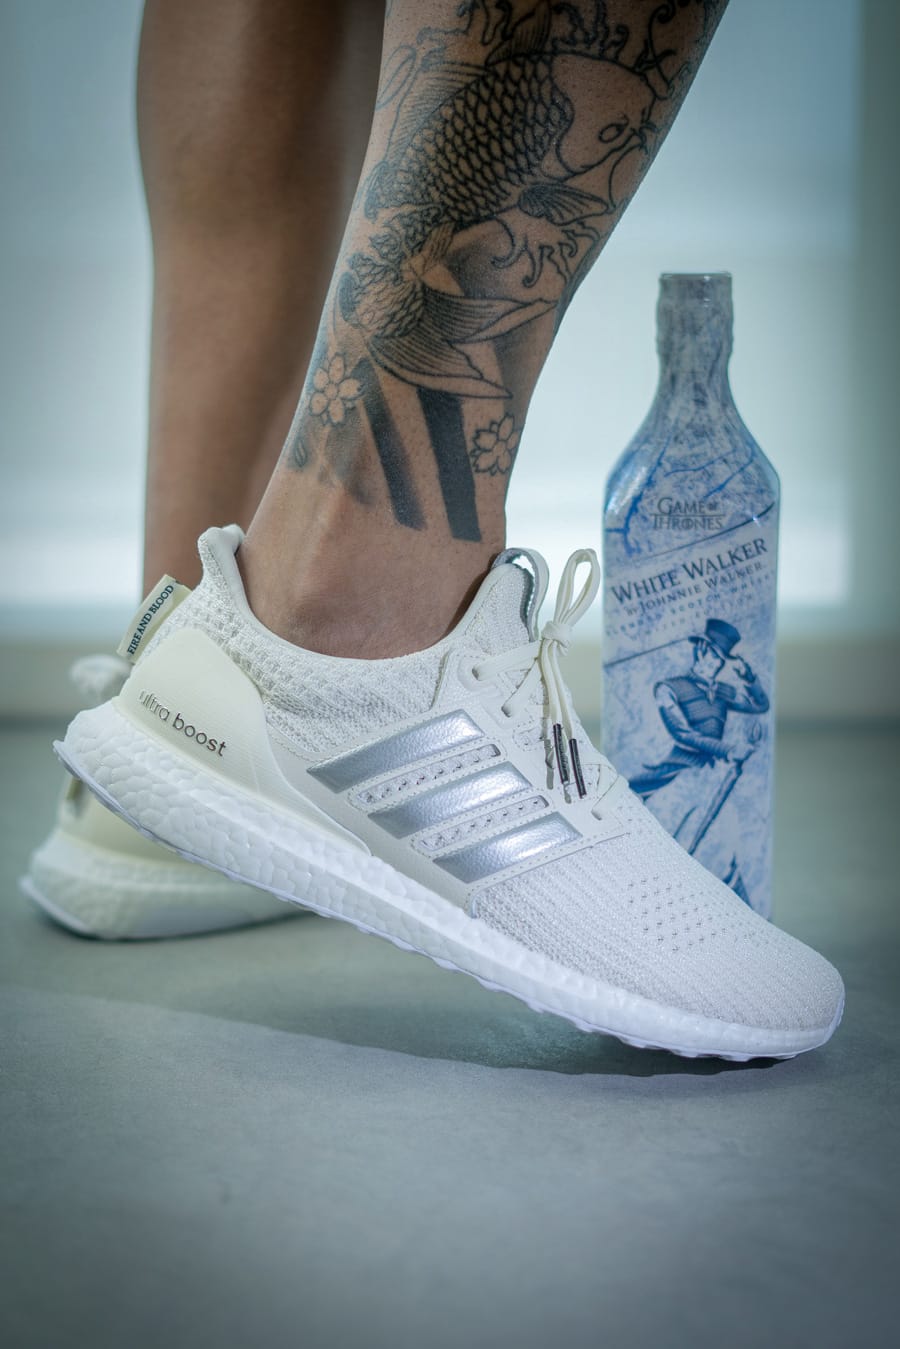 Game of Thrones x adidas UltraBOOST On 